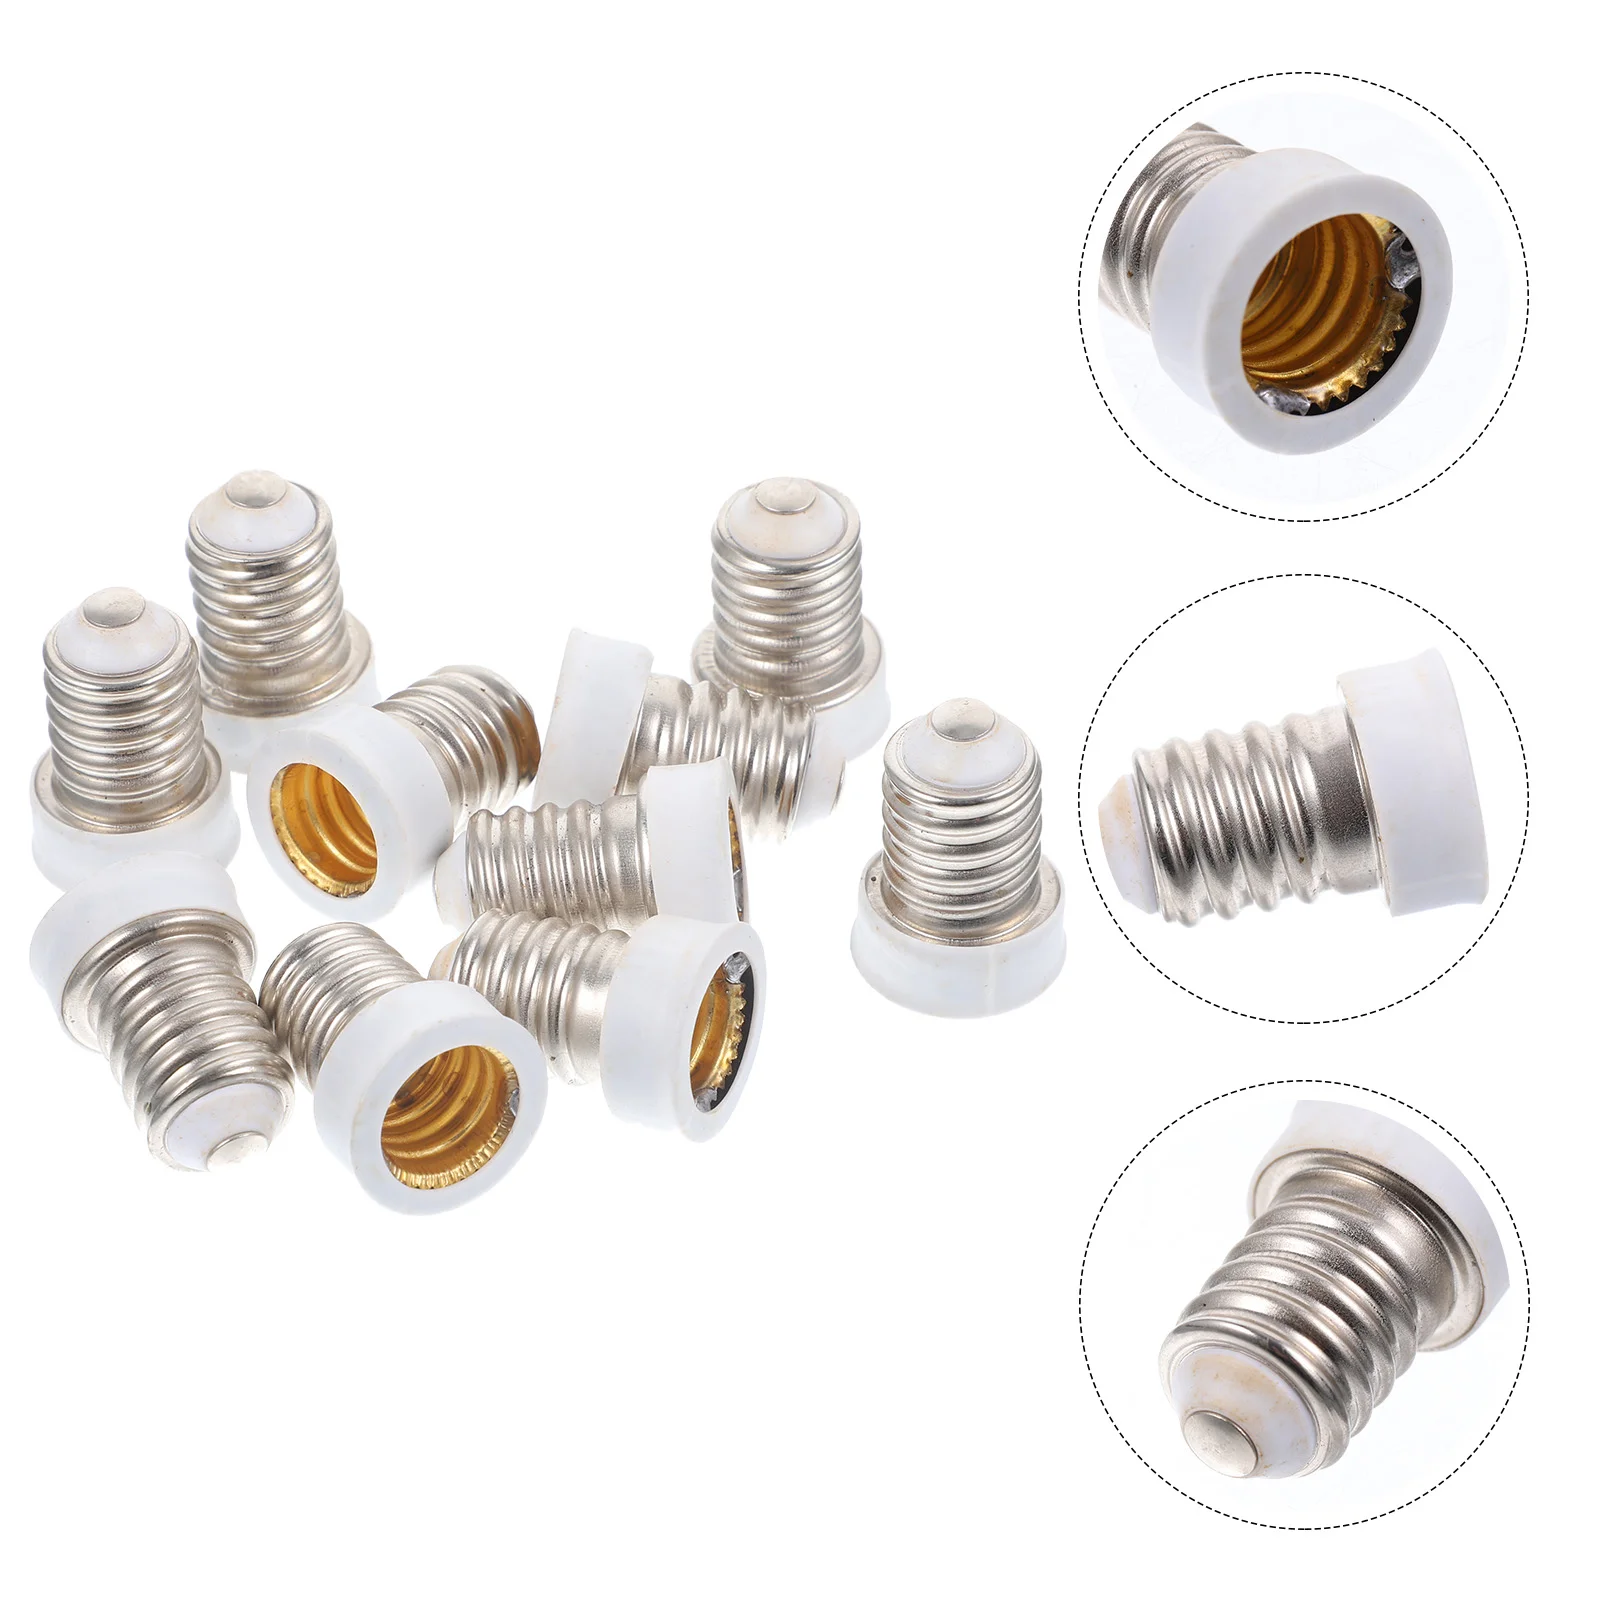 

10pcs Practical Sturdy Replacement Bulb Socket Converters Bulb Adapter E14 To E12 Converter Bulb Adapters